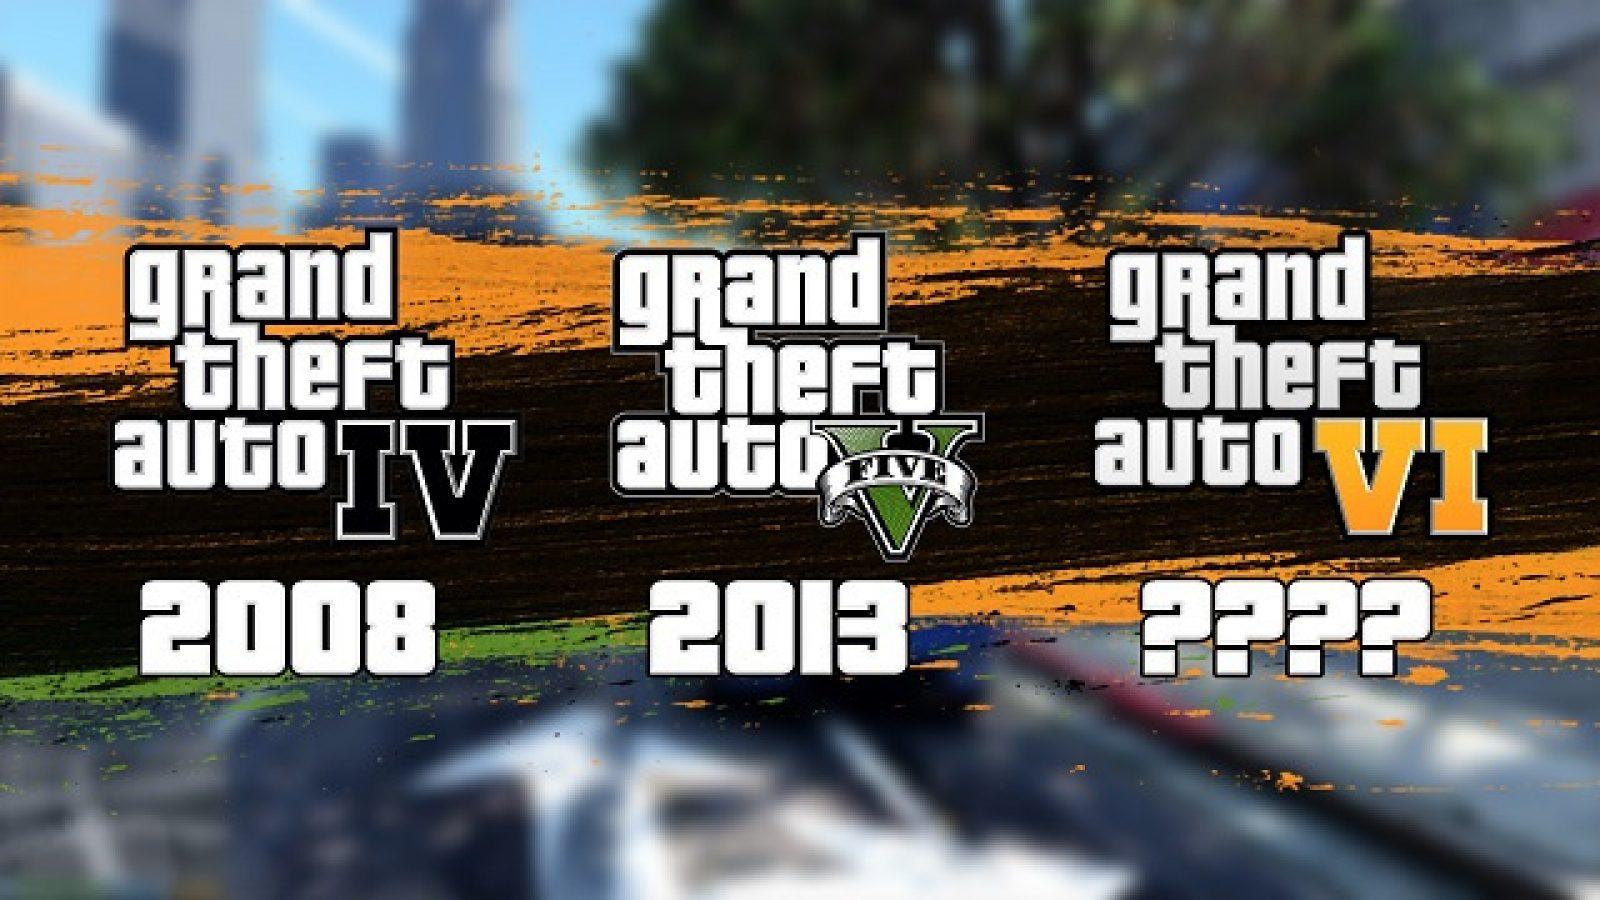 Grand Theft Auto 6 rumored for Fall 2021: misses PS5, new Xbox launch